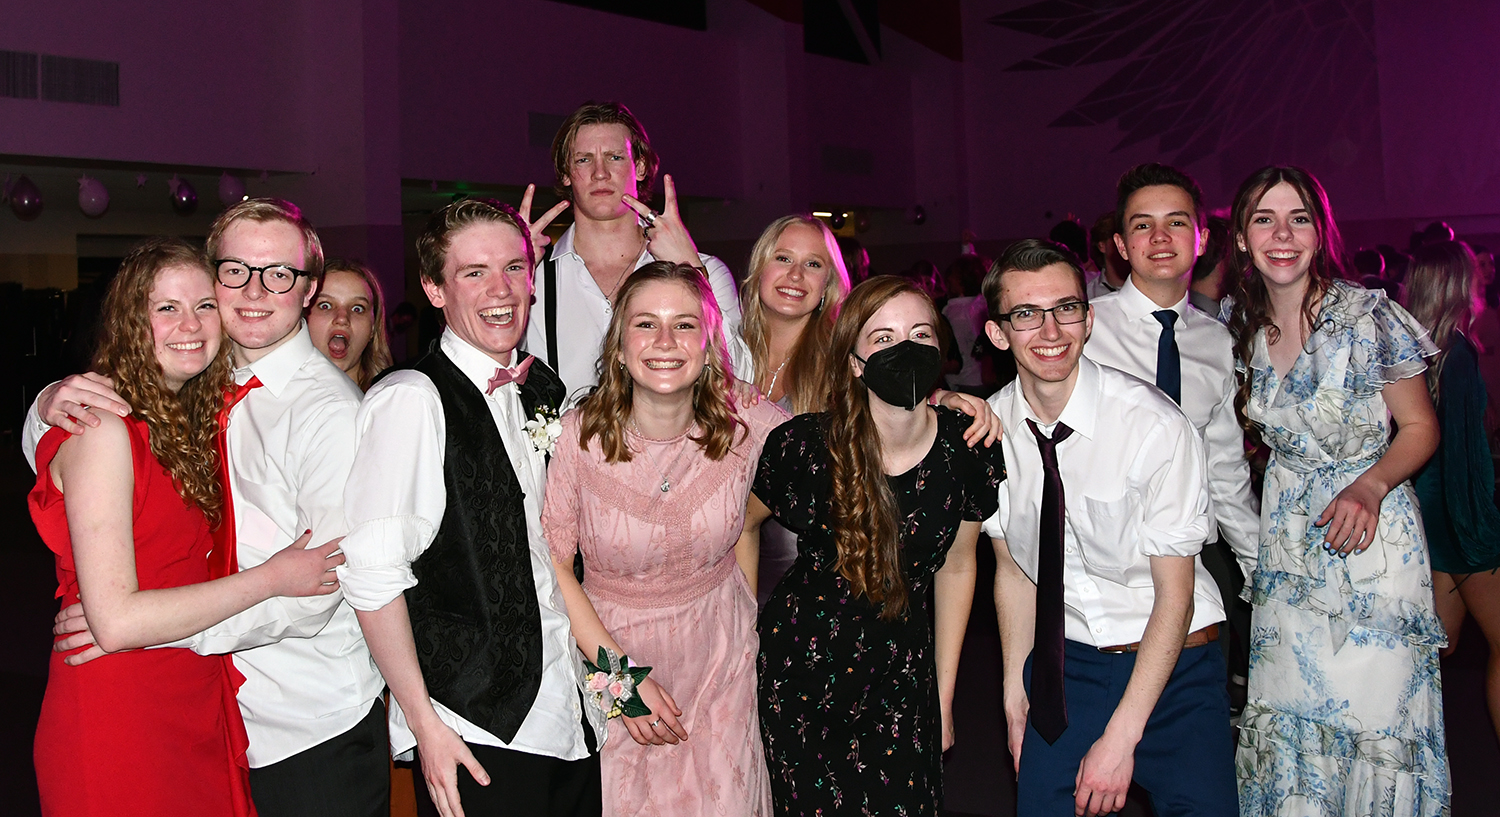 Students+Enjoy+Annual+Sweethearts+Dance+in+Spite+of+Covid+Protocols